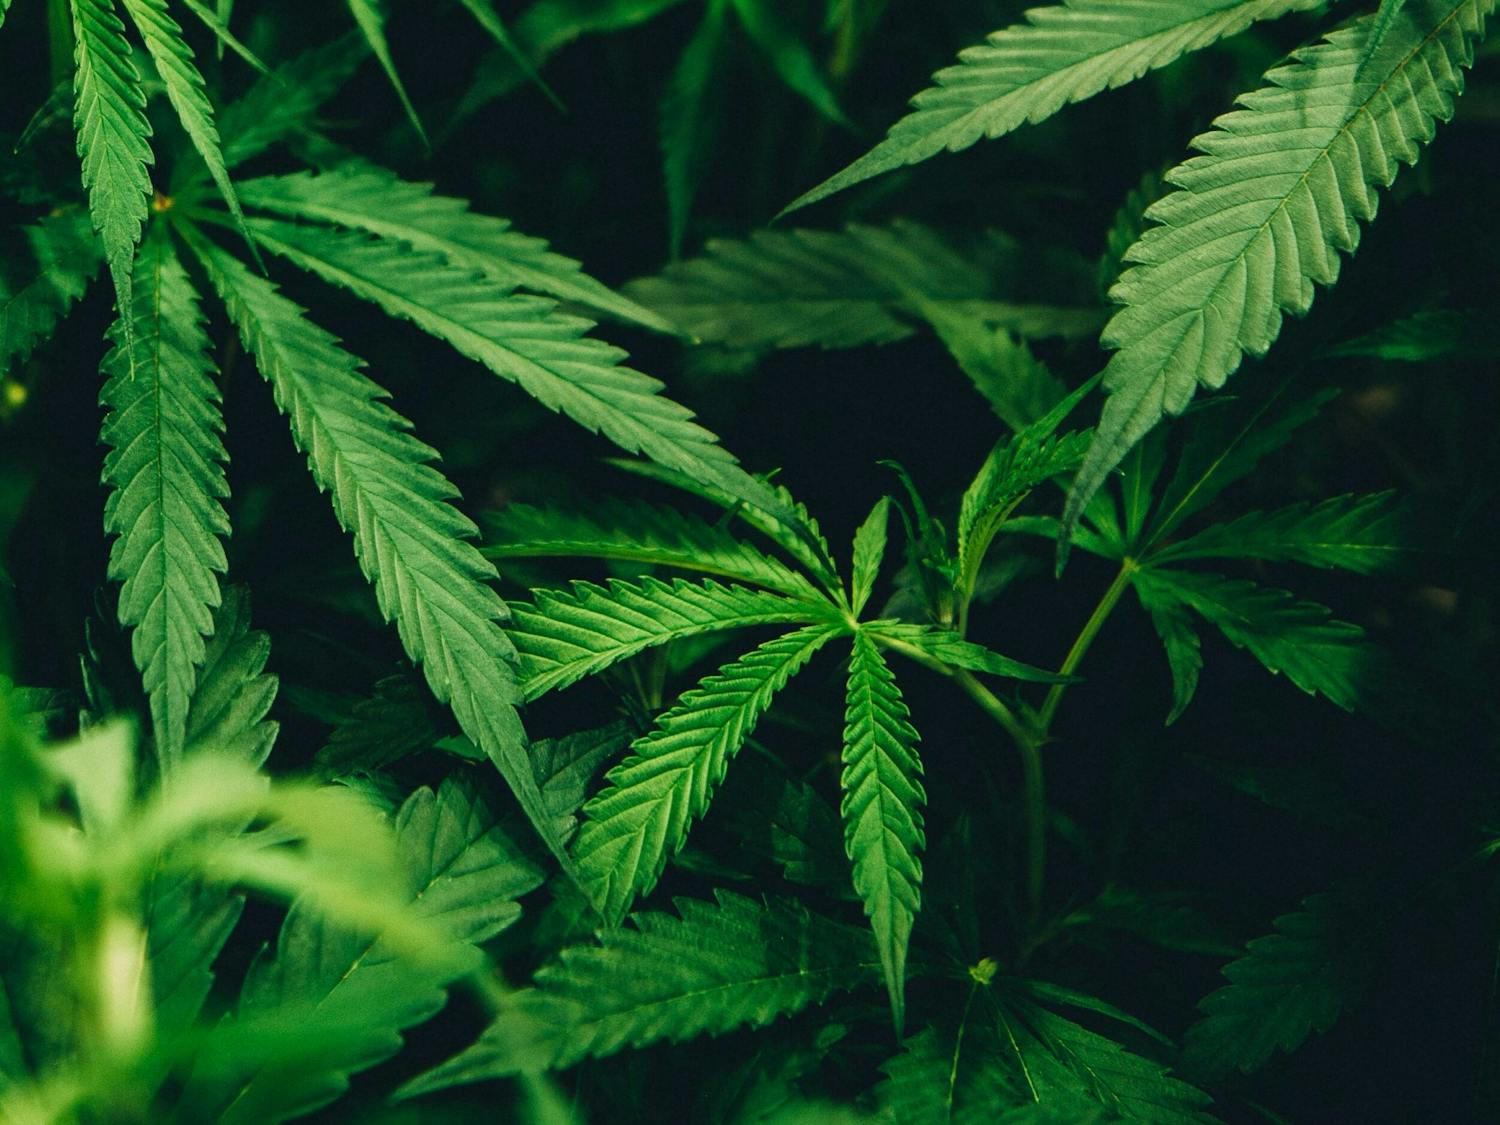 The “Marijuana Regulation and Taxation Act” states that anyone over the age of 21 may carry up to three ounces of cannabis and 24 grams of cannabis concentrate, along with a maximum of 12 plants per household — six mature and six immature plants.